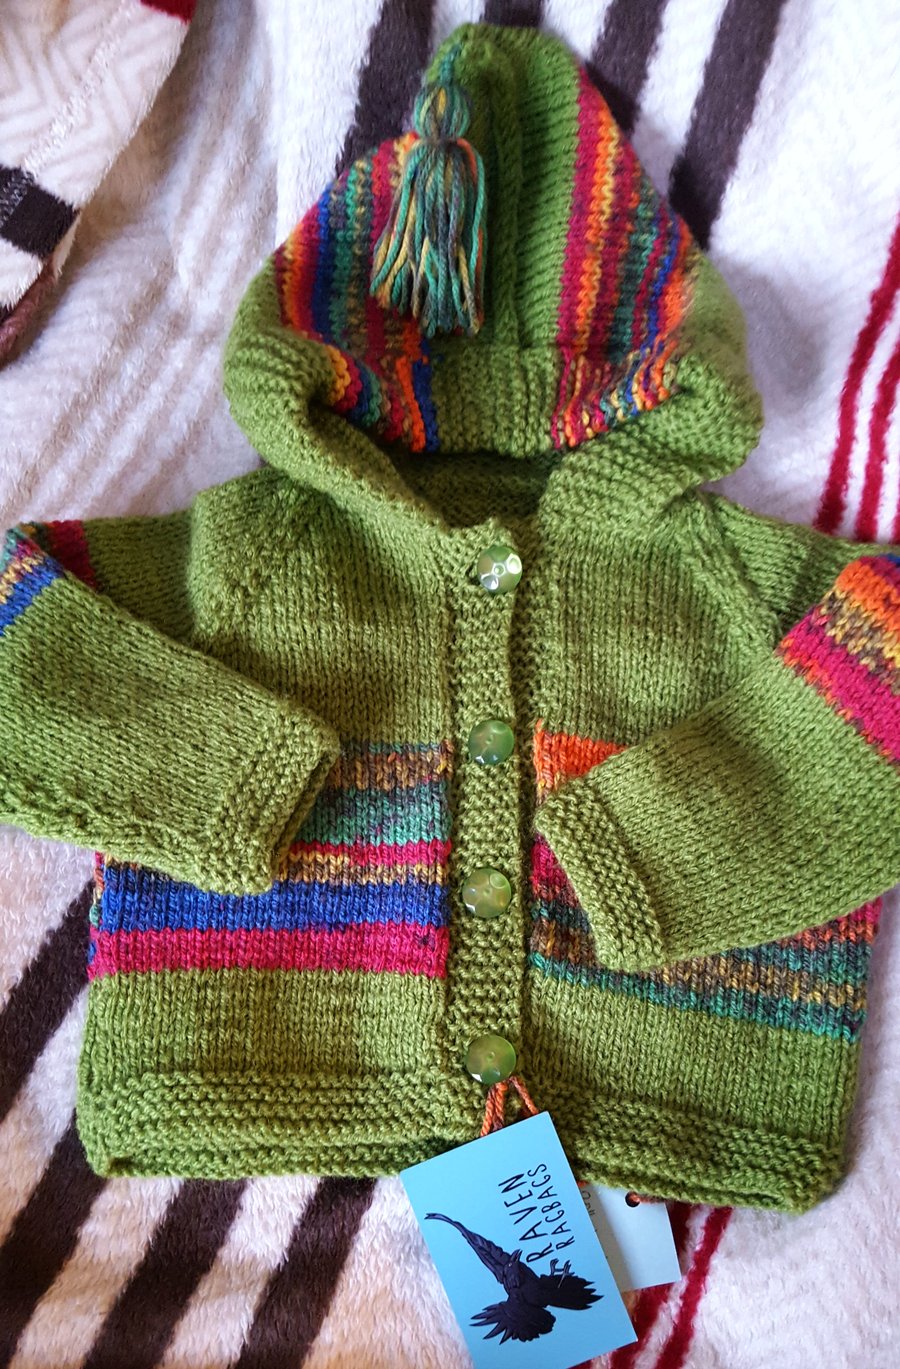 Colourful hand-knitted baby hoodie